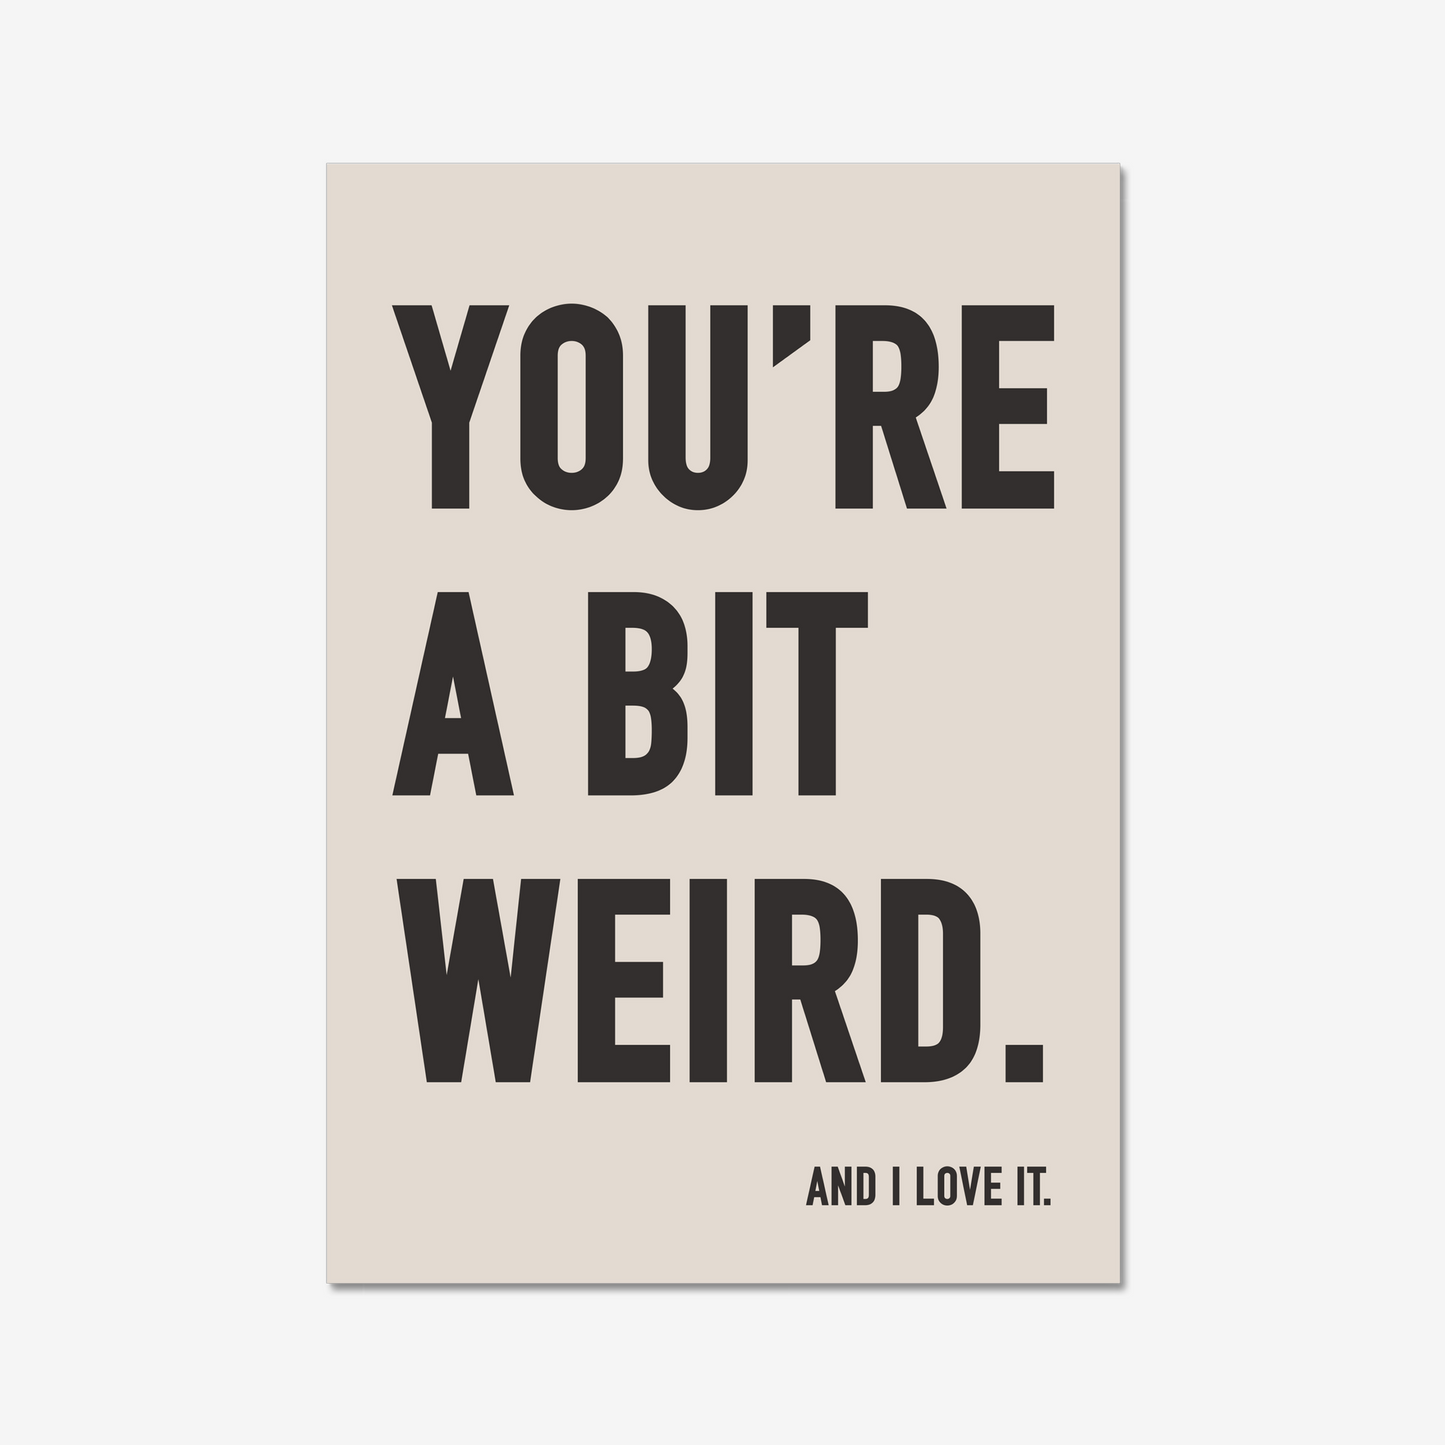 You're A Bit Weird. And I love it - Digital Download